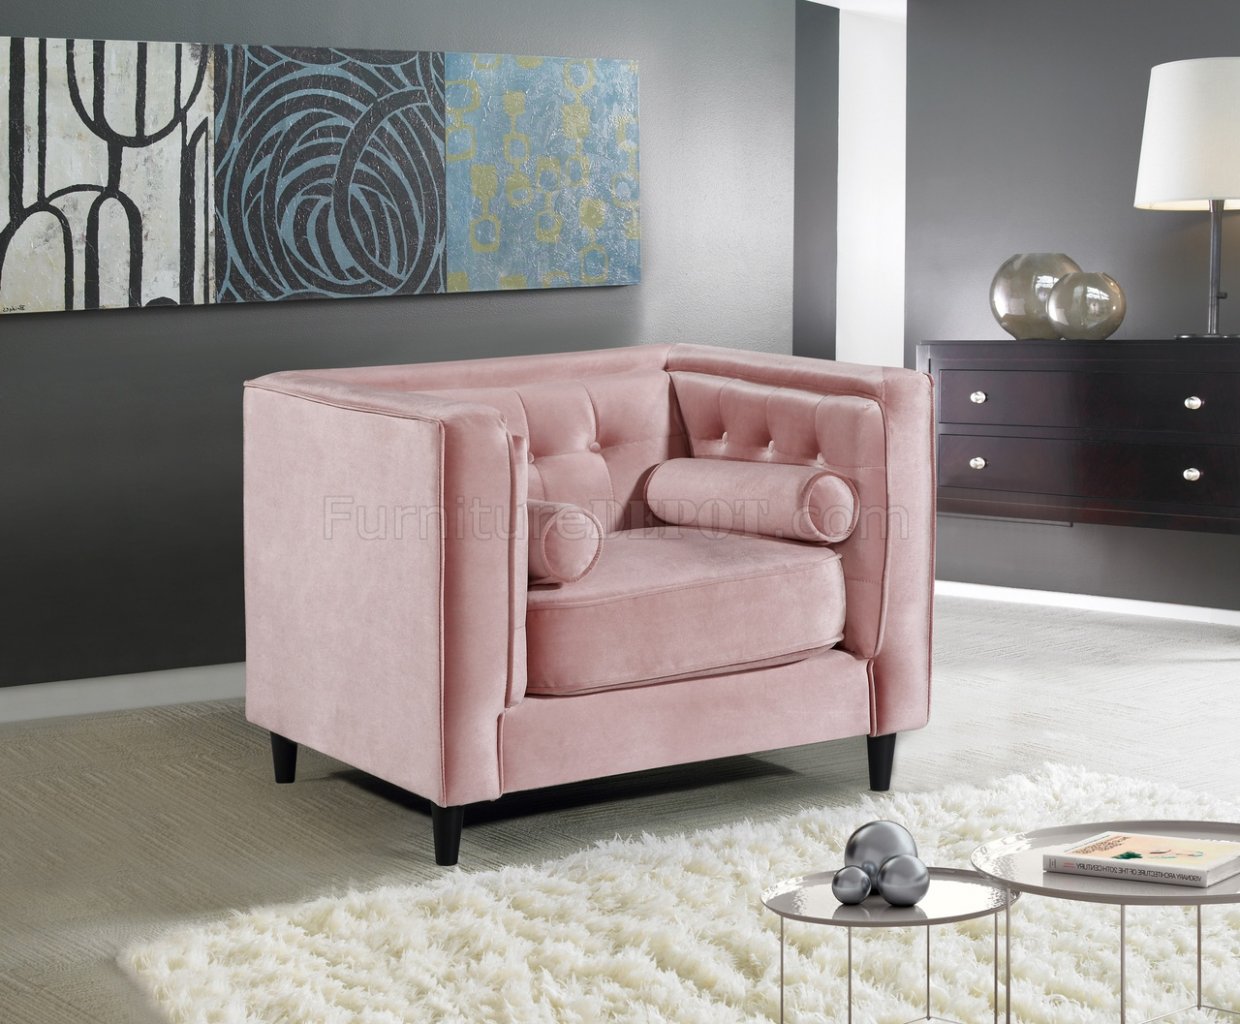 Taylor Sofa 642 in Pink Velvet Fabric by Meridian w/Options